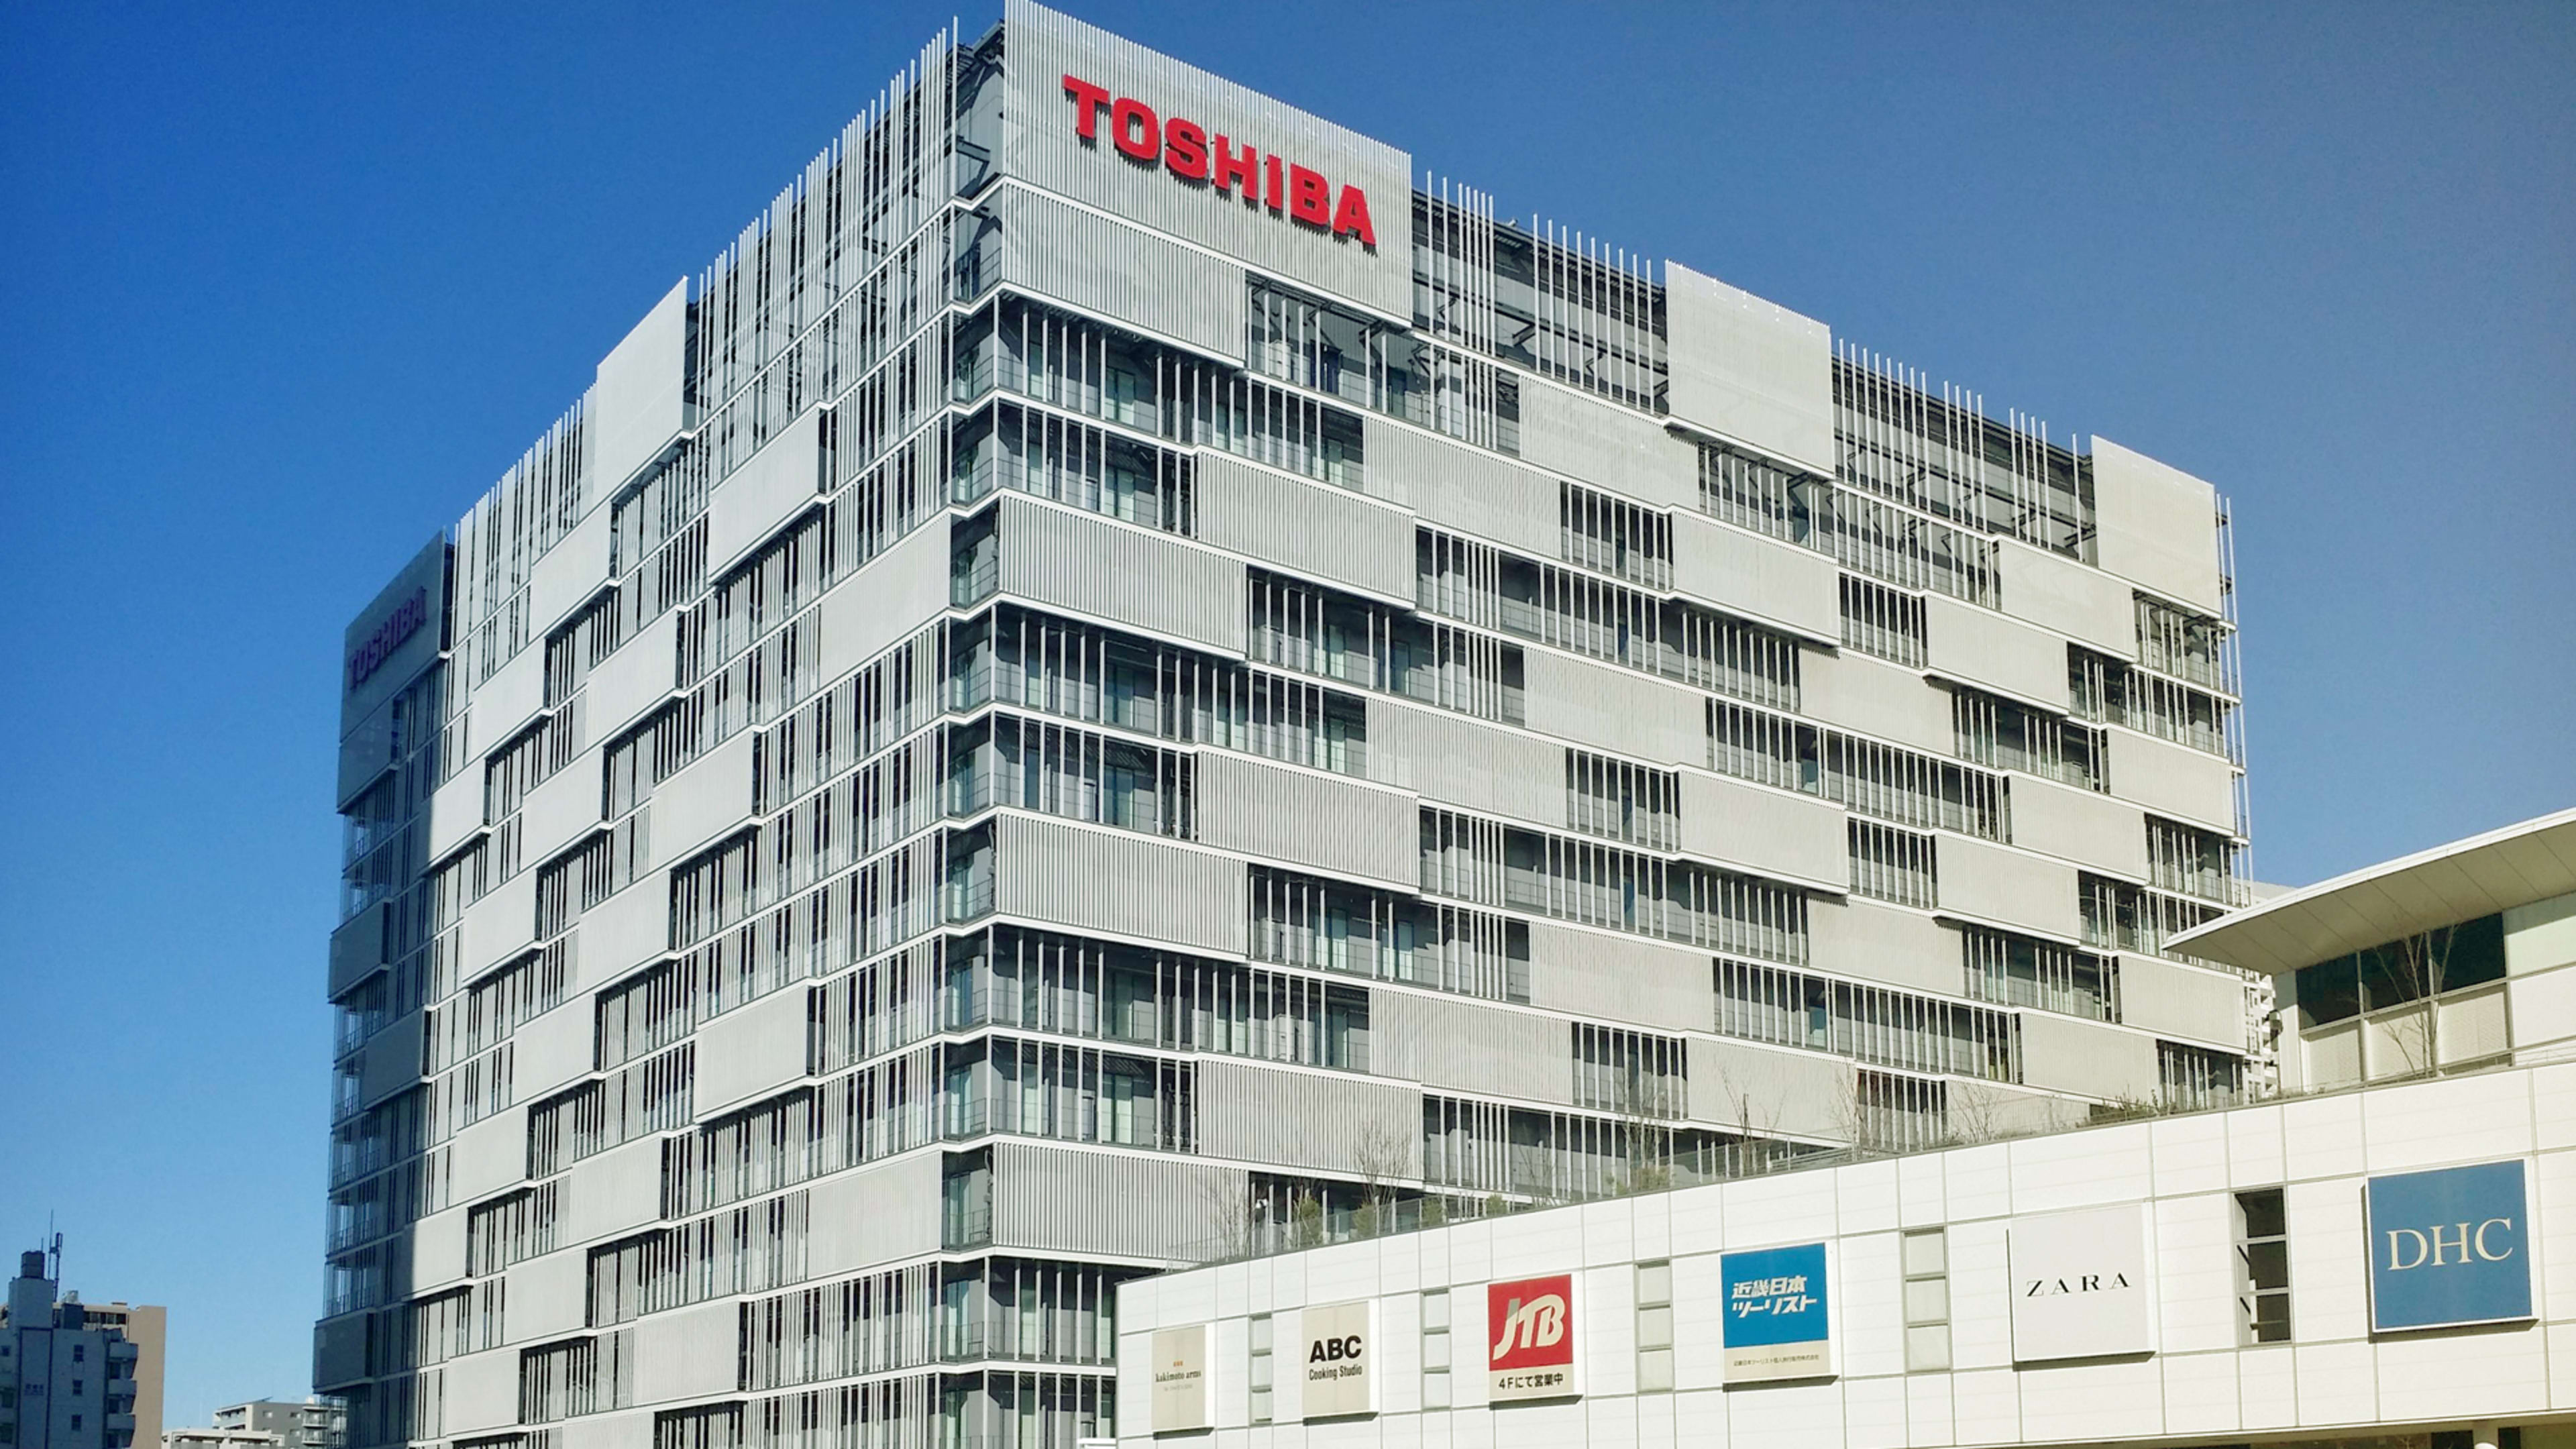 Sharp is buying Toshiba’s PC business